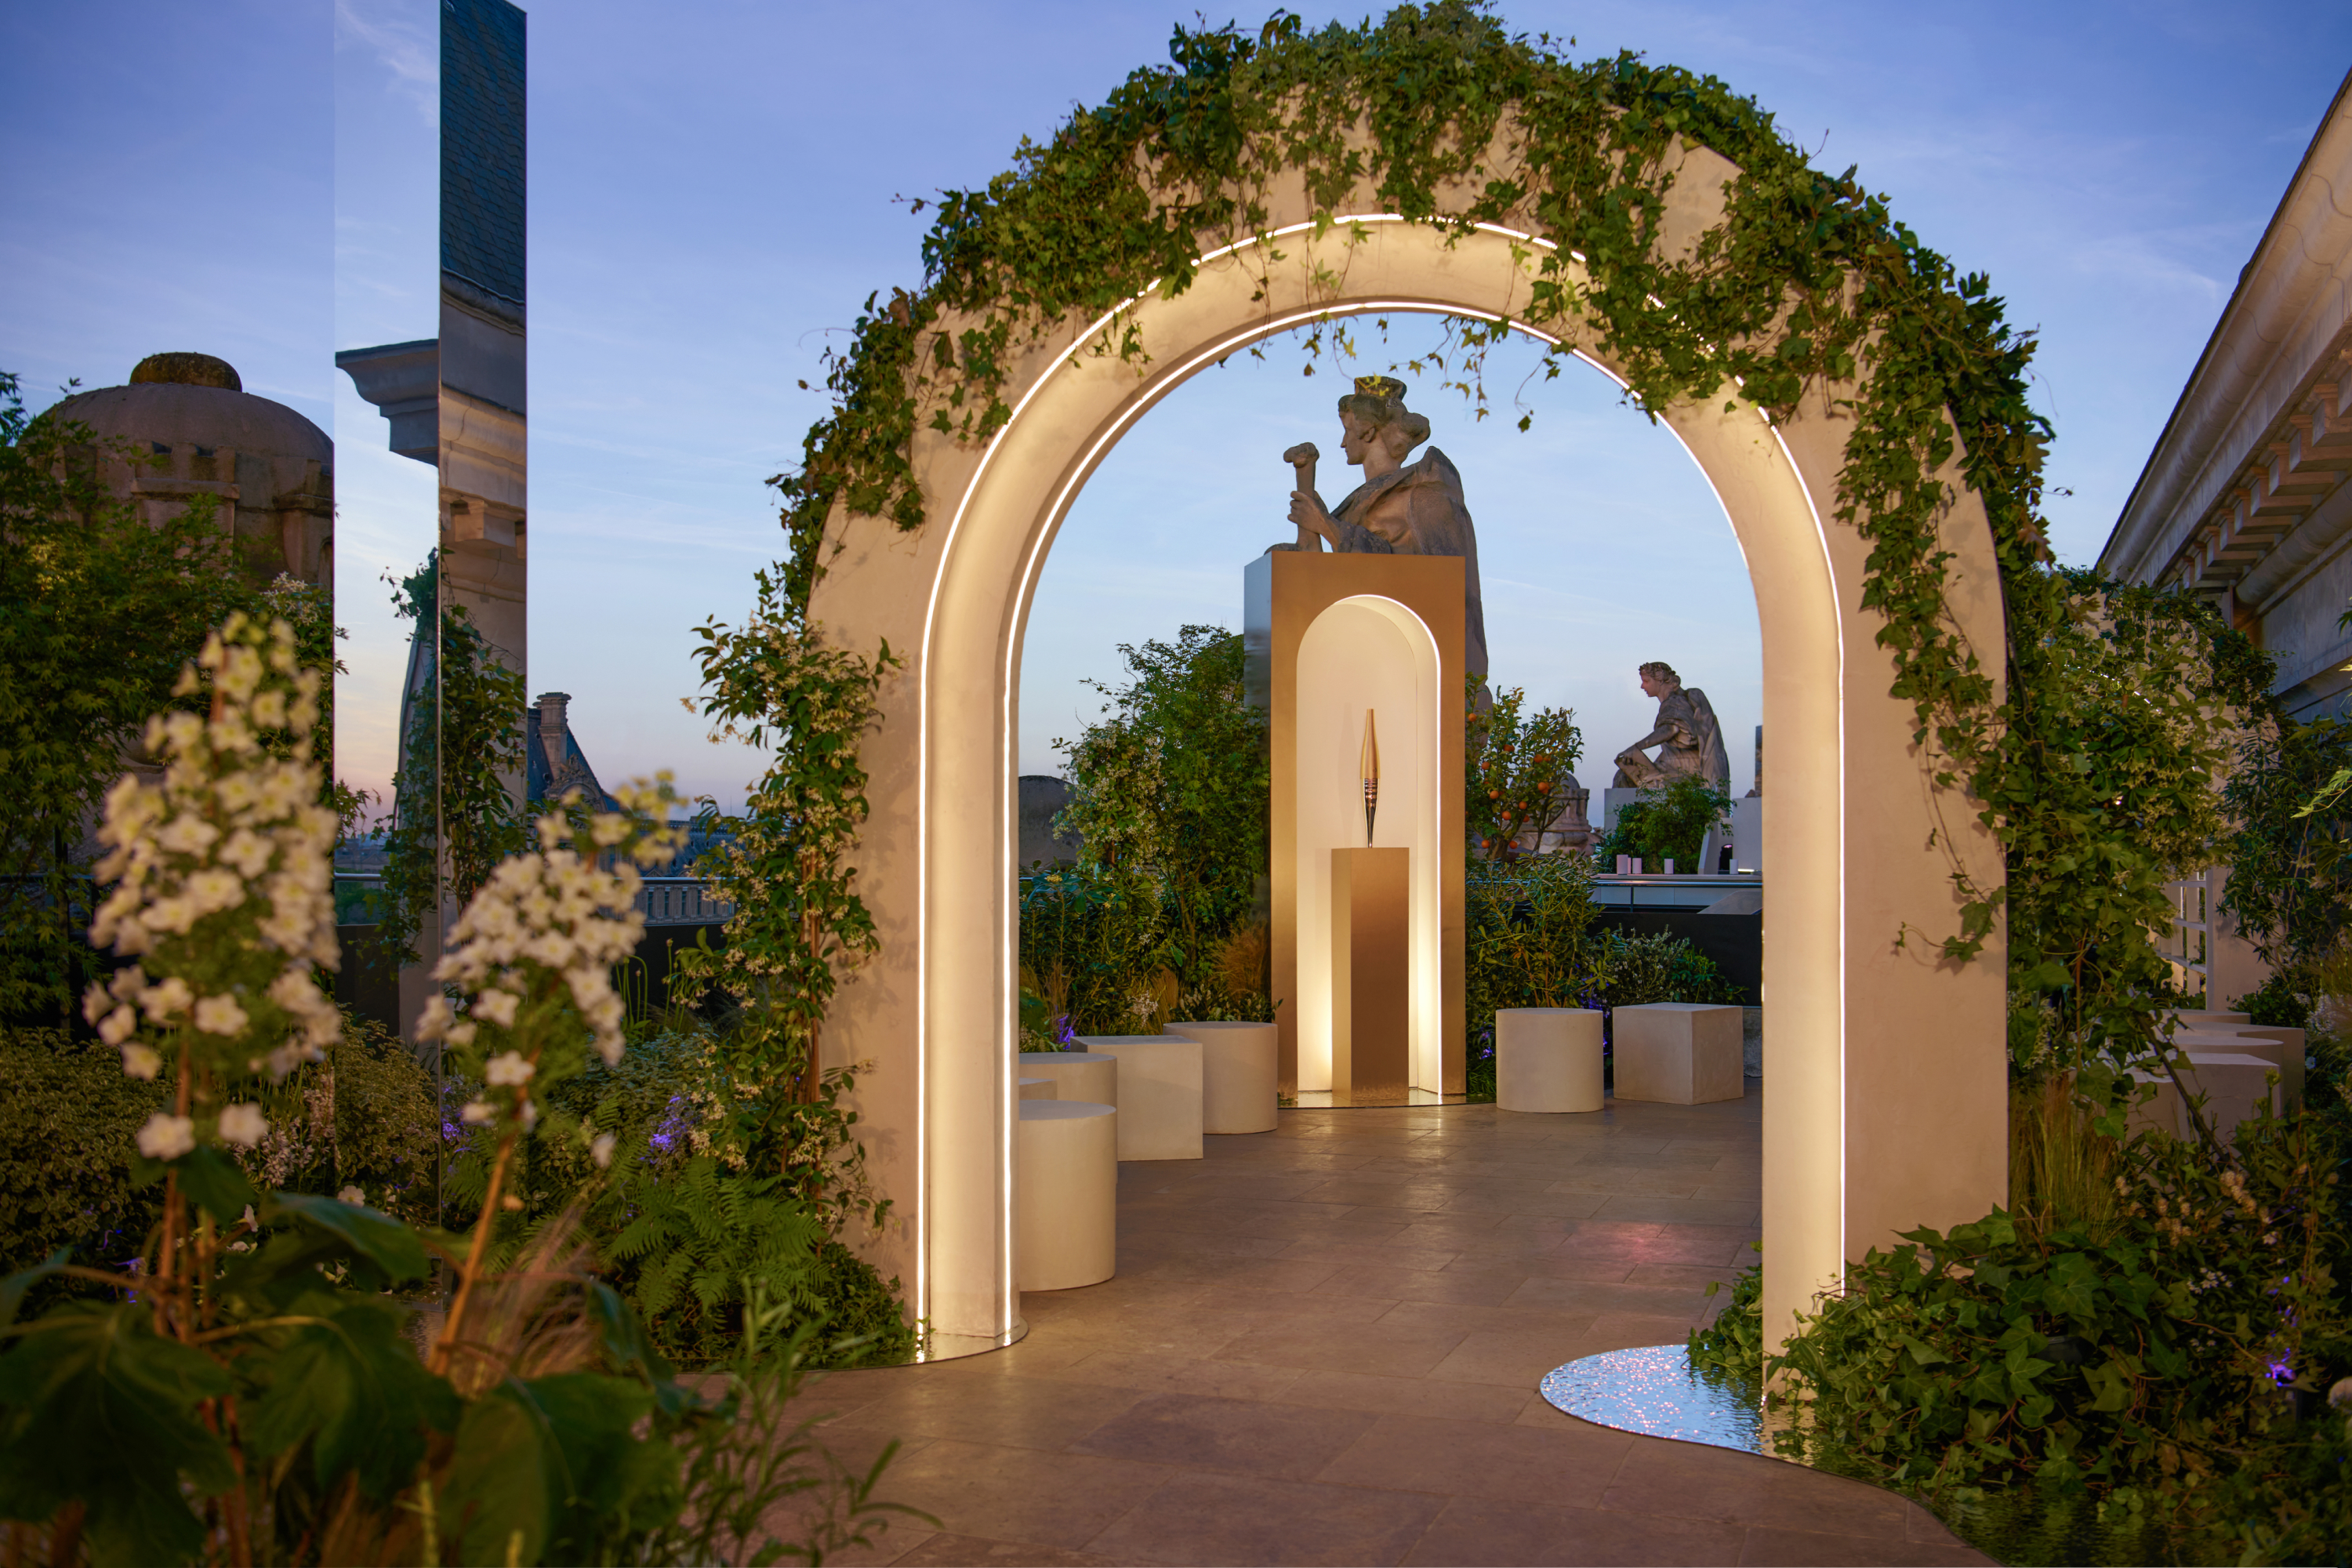 View of one of the specially installed arches on the terrace, decorated with climbing plants.